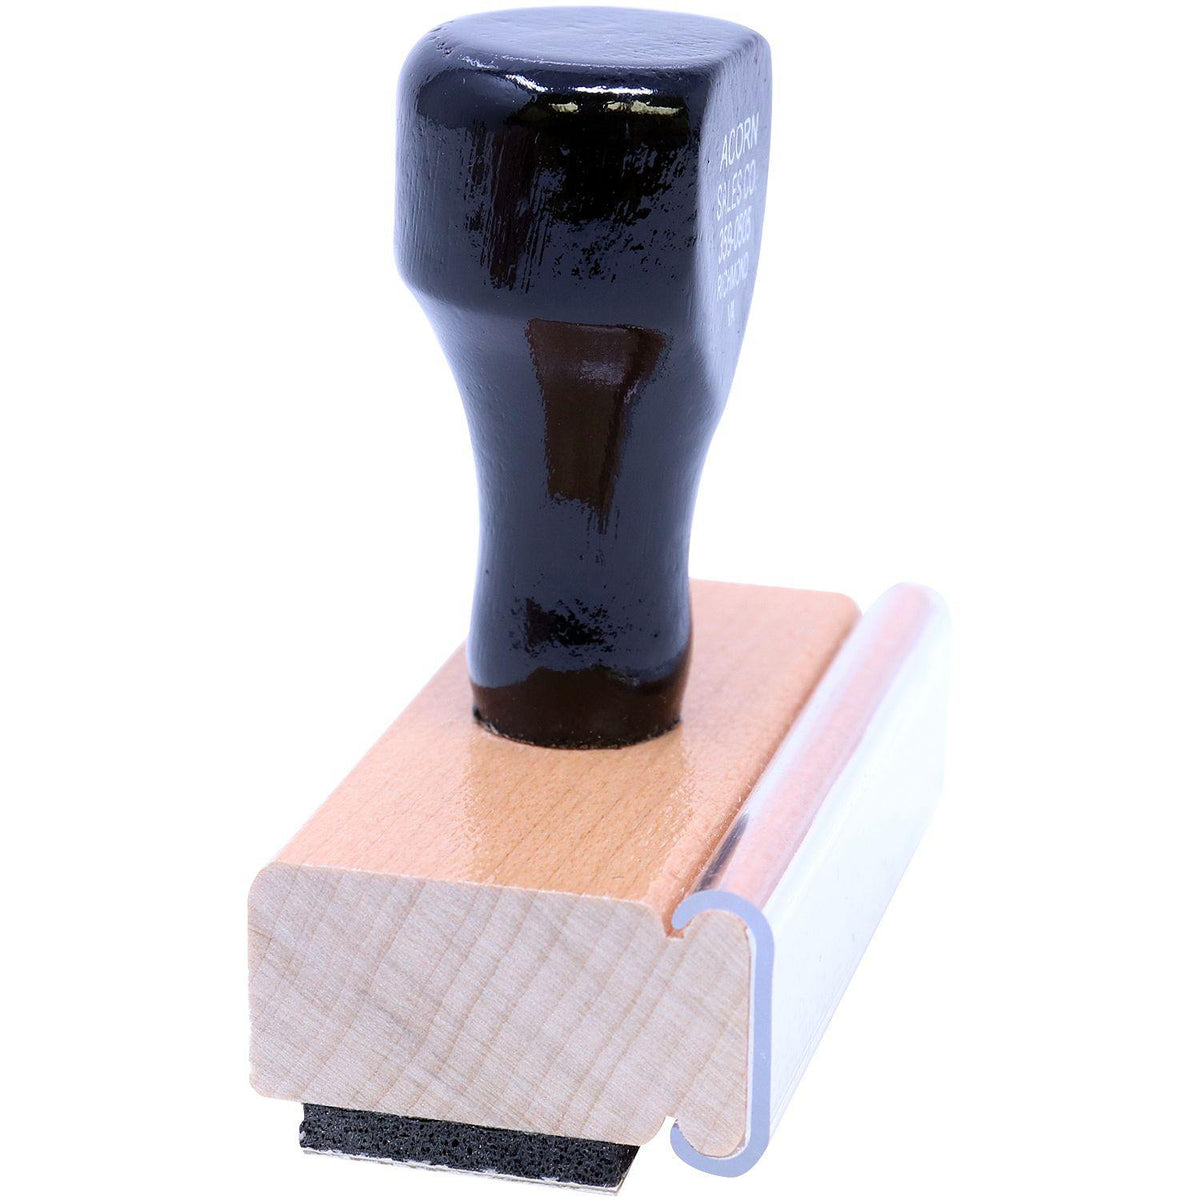 Side View of Large Official Transcript Rubber Stamp at an Angle